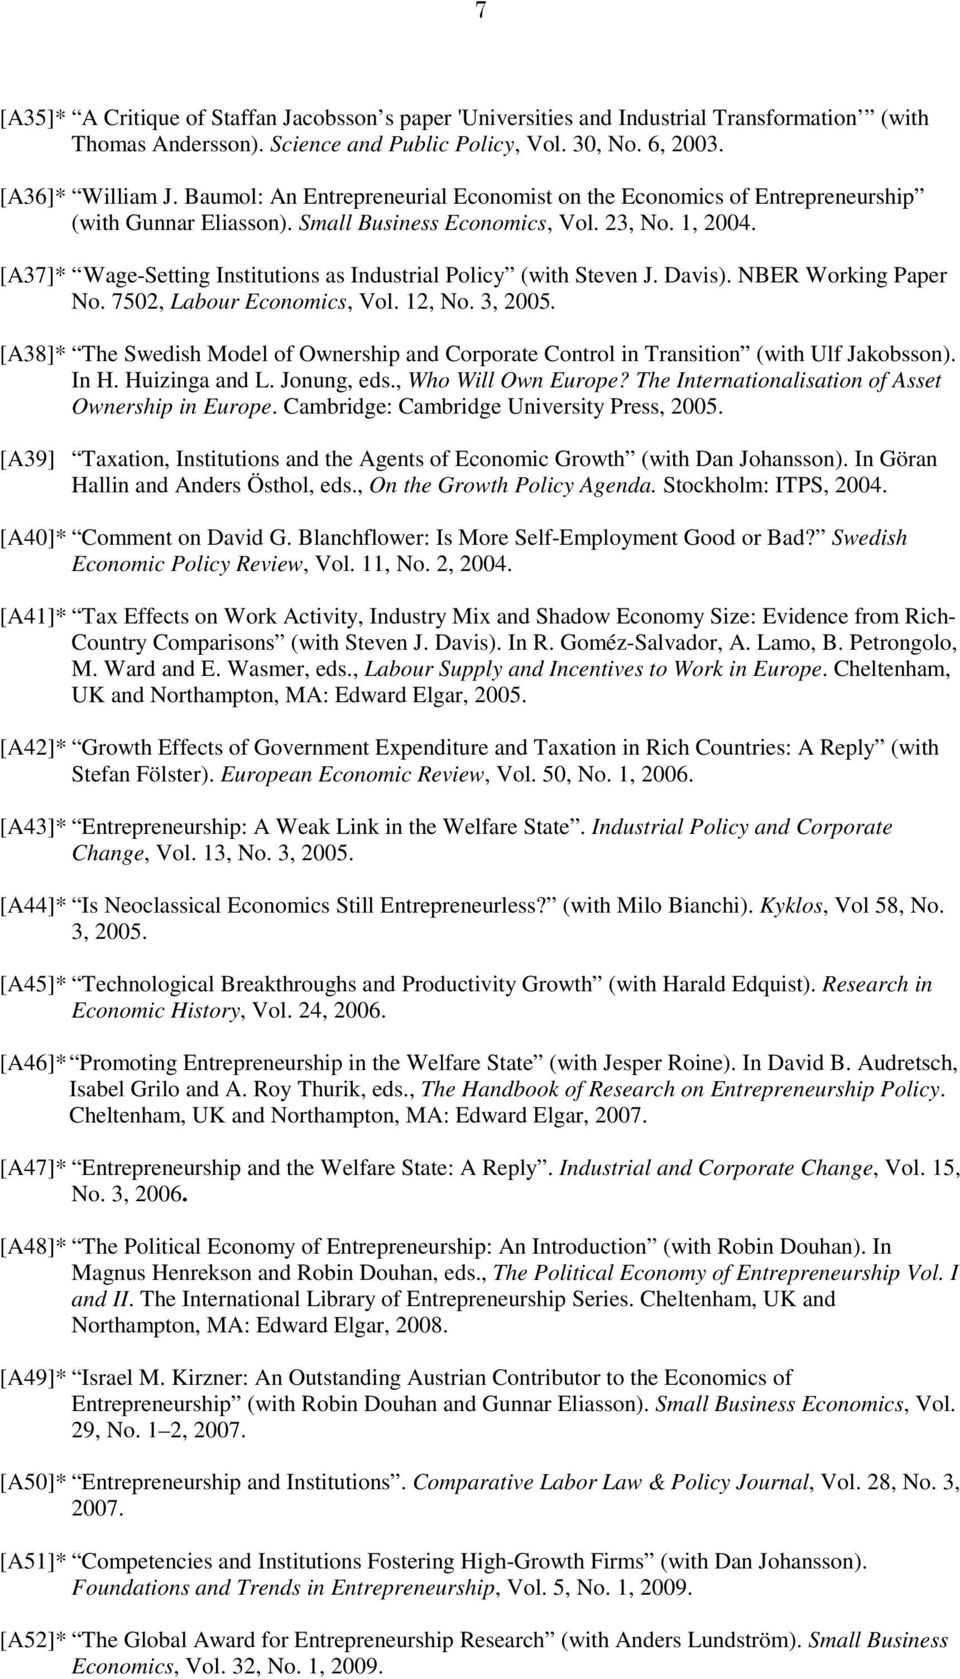 [A37]* Wage-Setting Institutions as Industrial Policy (with Steven J. Davis). NBER Working Paper No. 7502, Labour Economics, Vol. 12, No. 3, 2005.